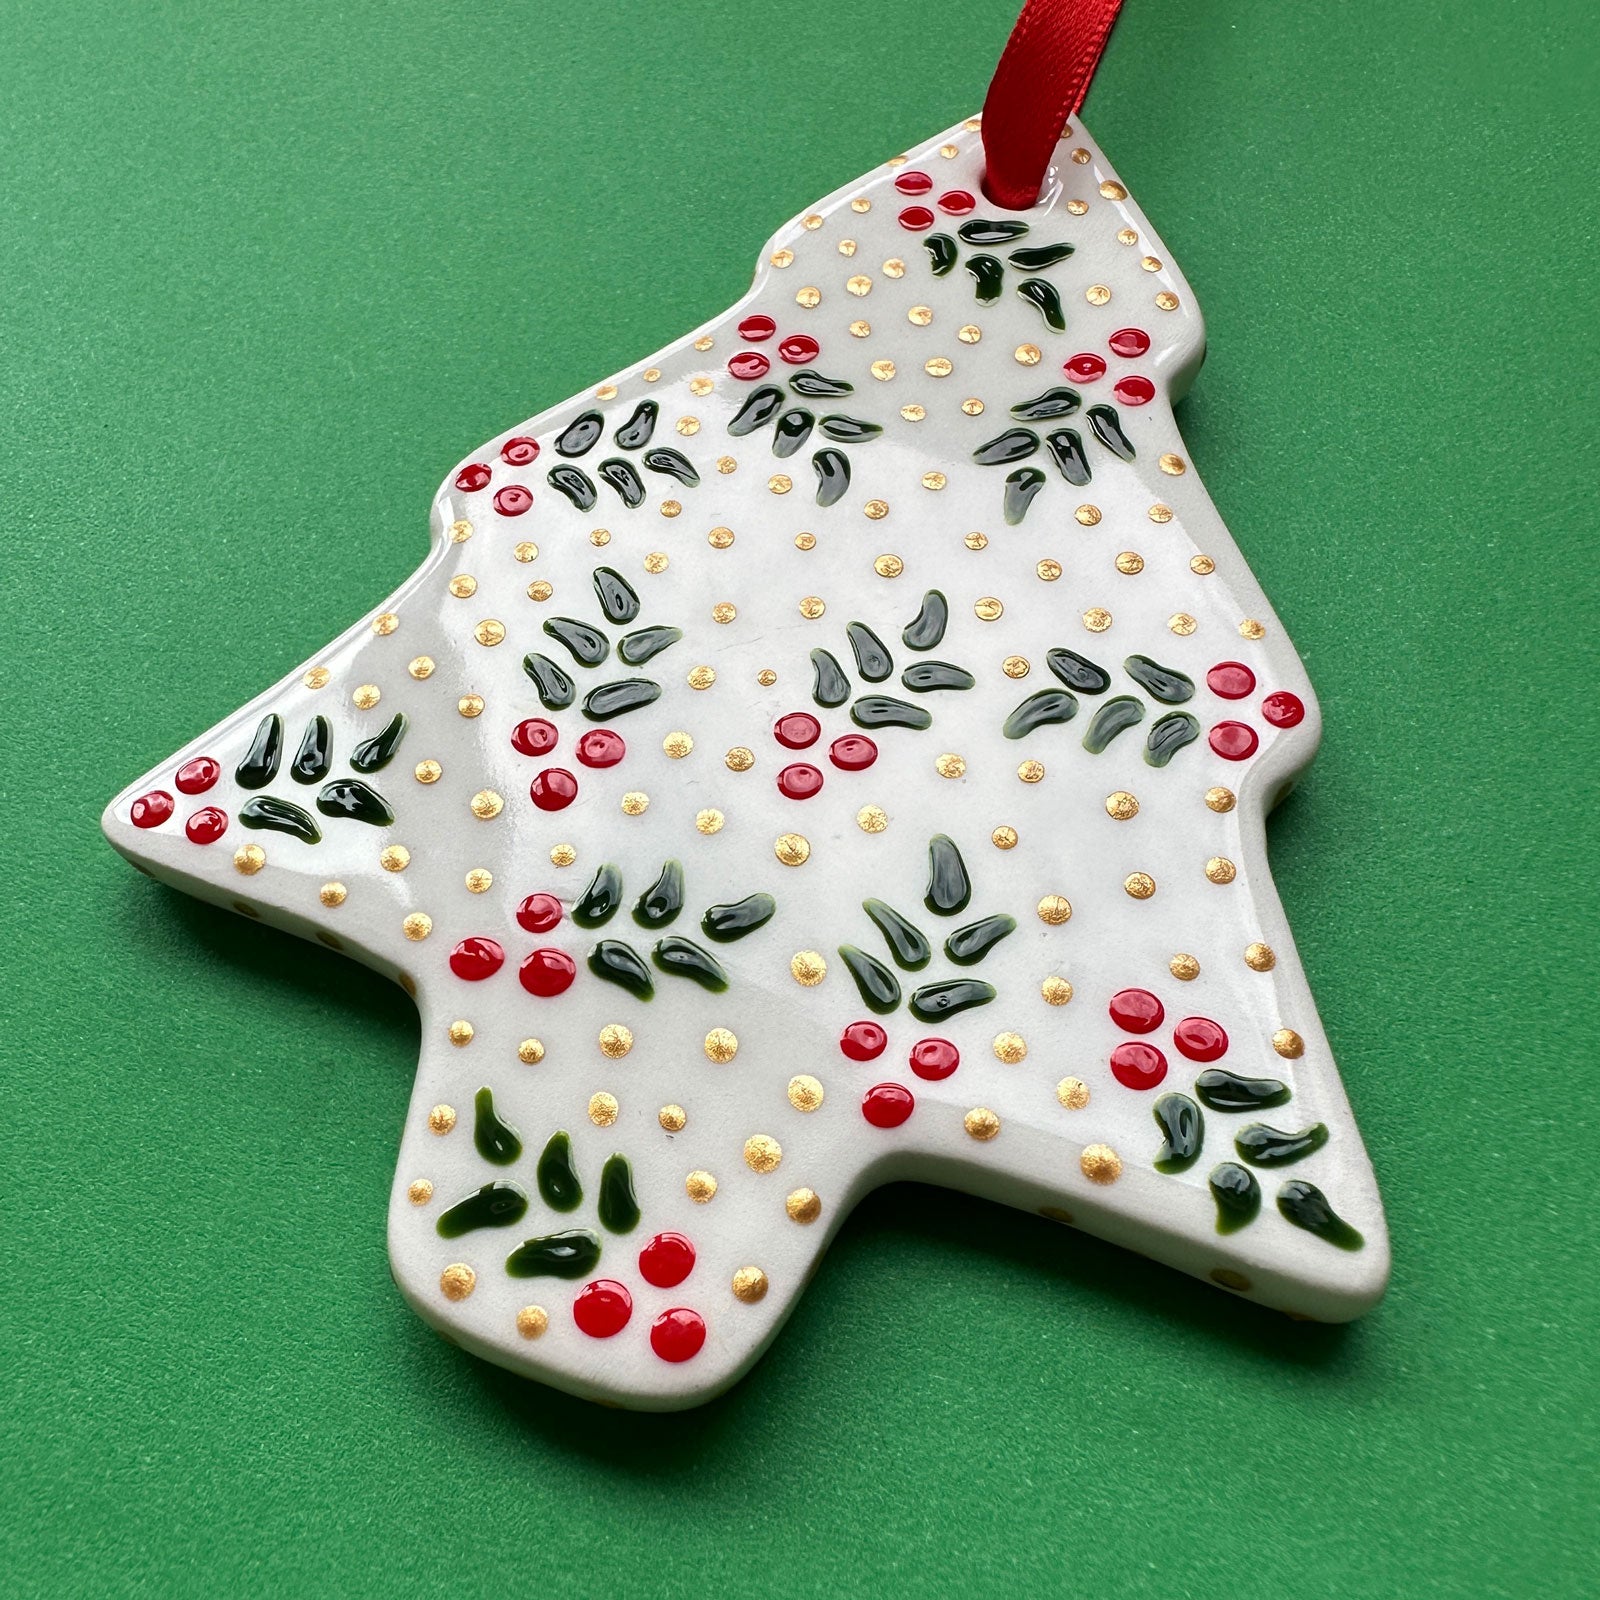 Holly and Gold Dot - Hand Painted Tree Ornament